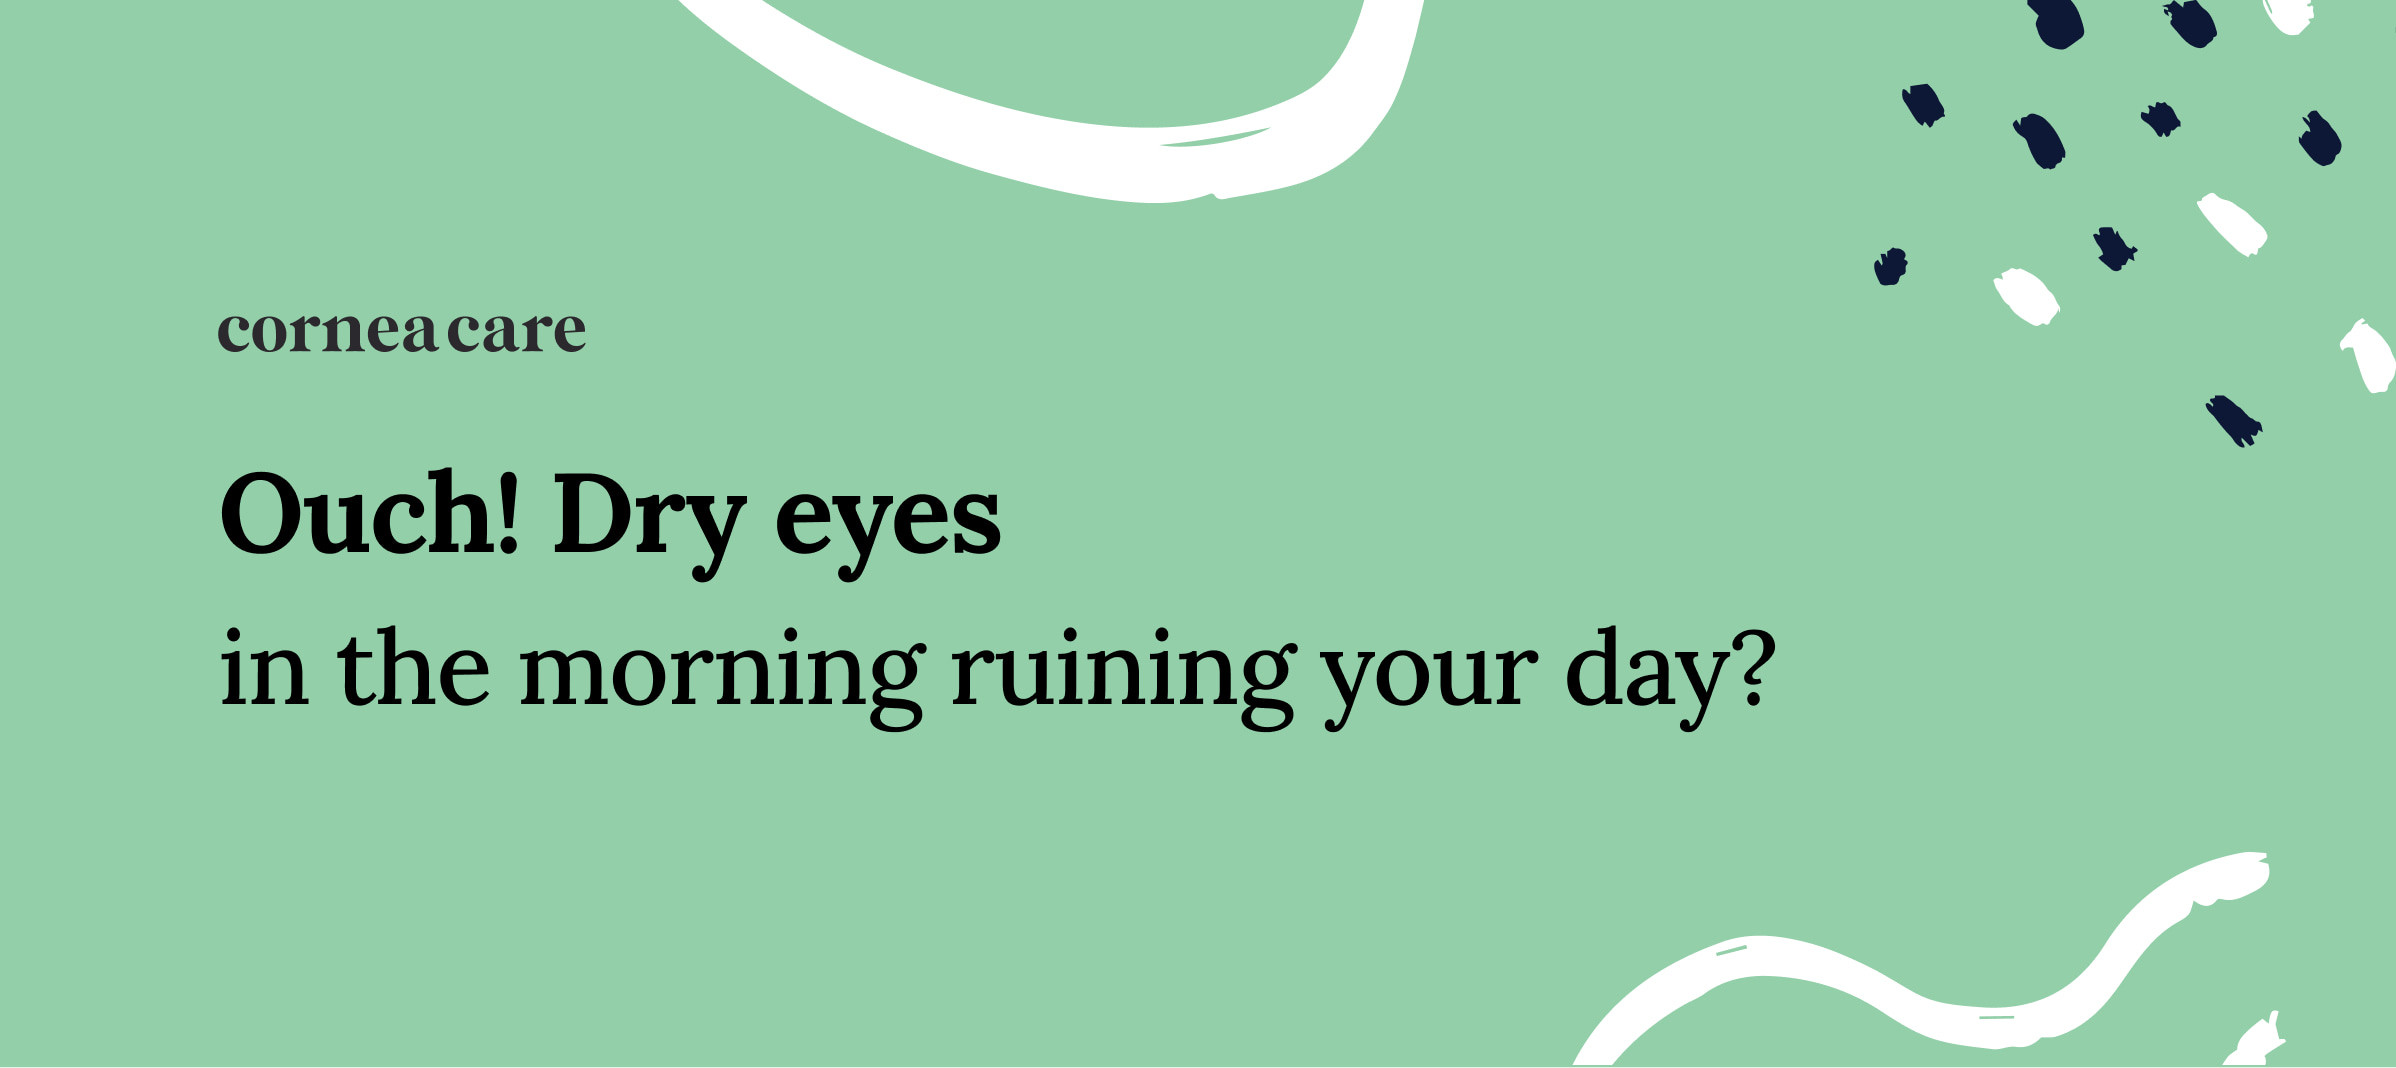 Tips for managing dry eyes in the morning